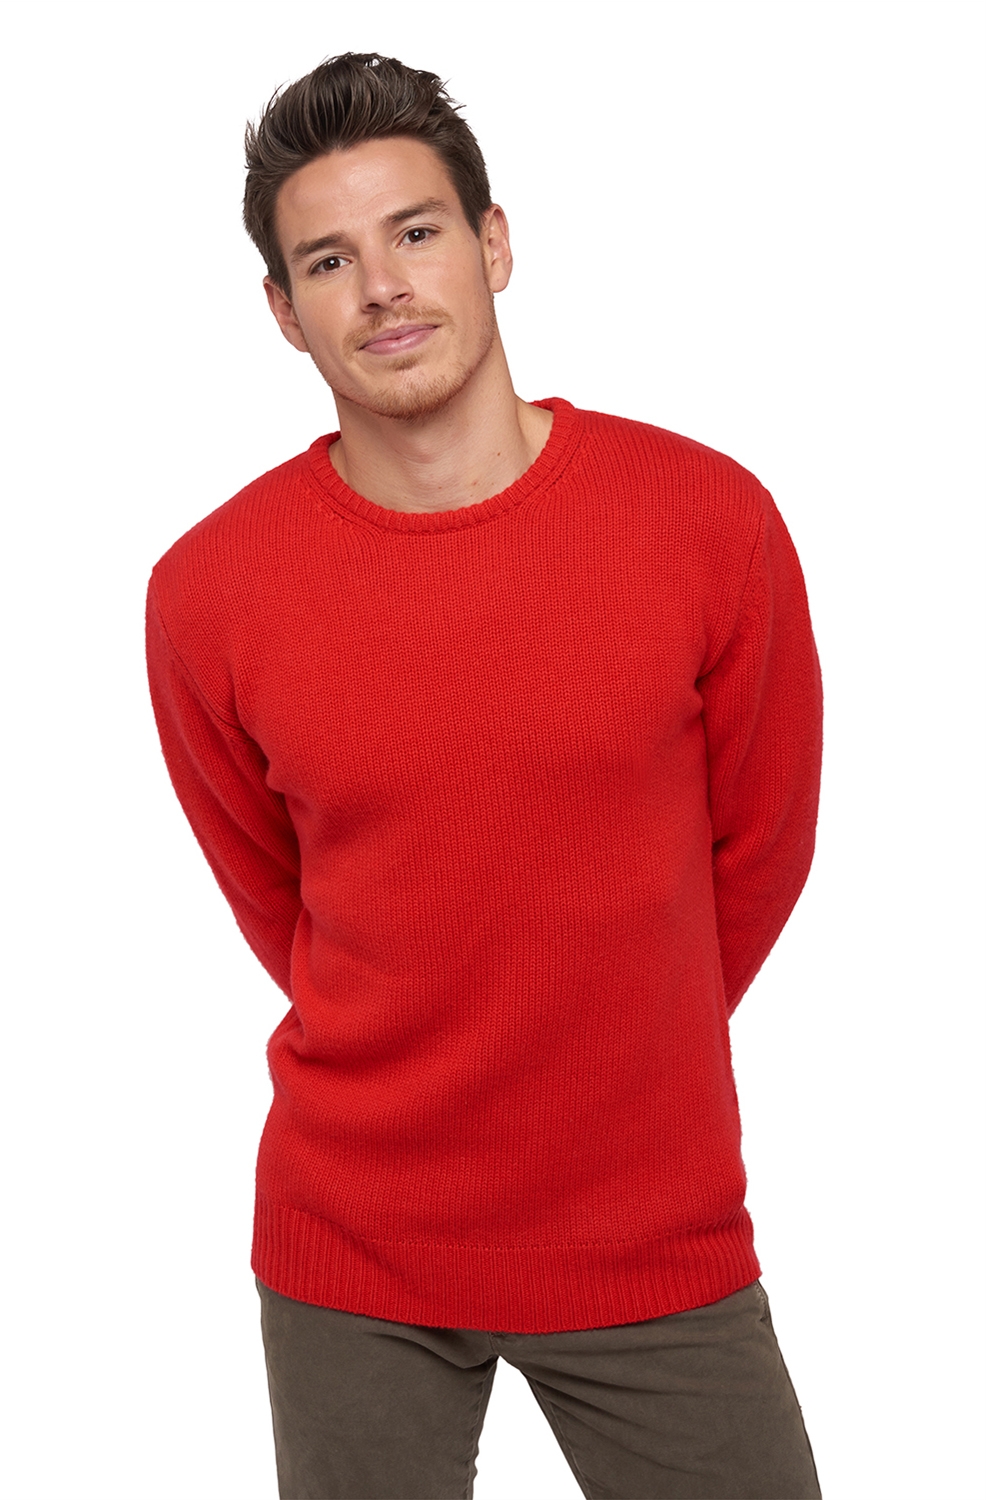 Cachemire pull homme col rond bilal rouge 2xl